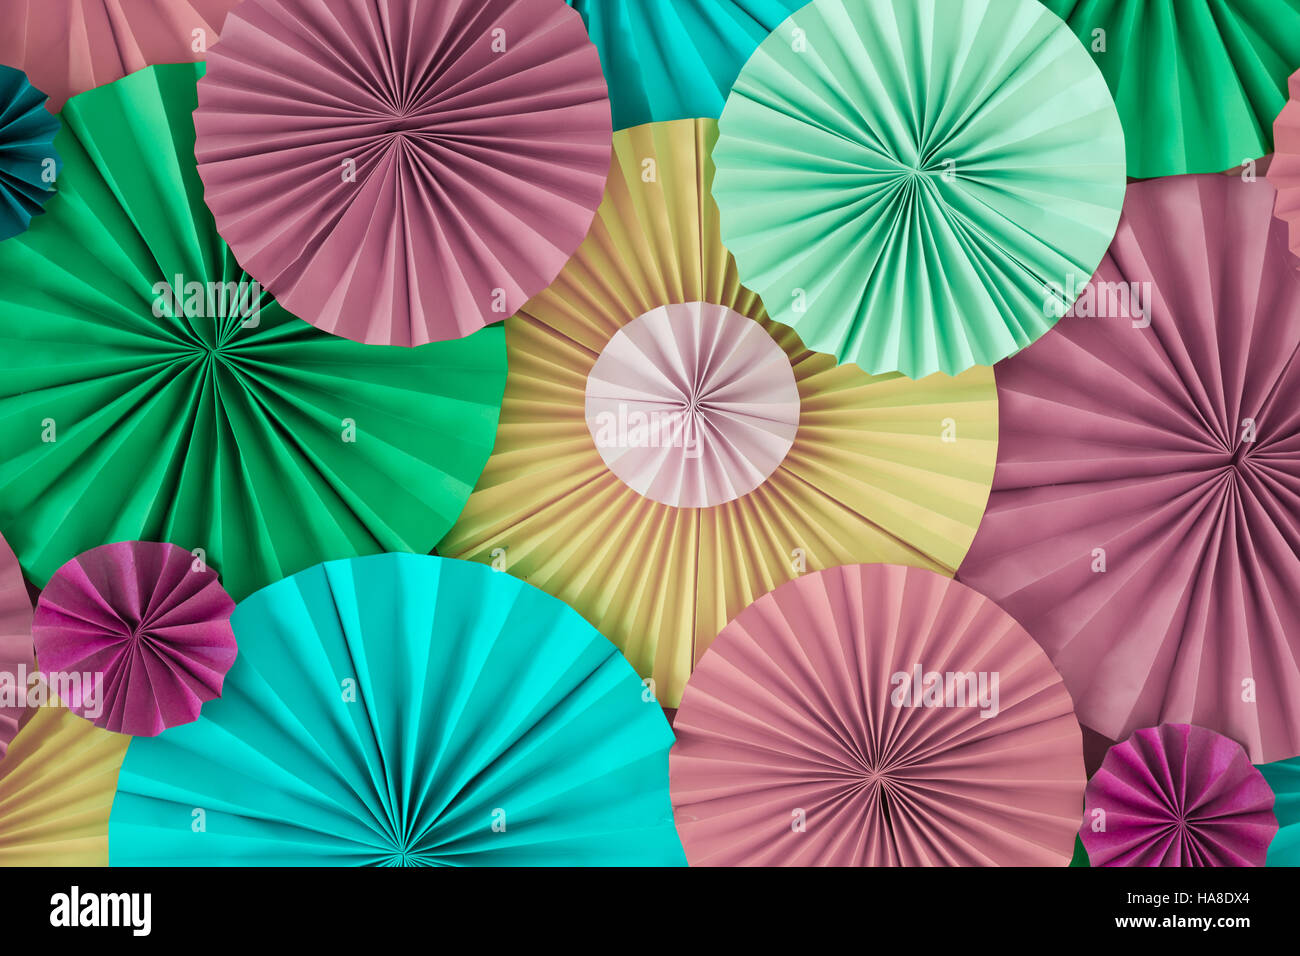 Colorful celebration background wall with multicolored paper circles of pink, lilac, yellow, green and blue colors Stock Photo